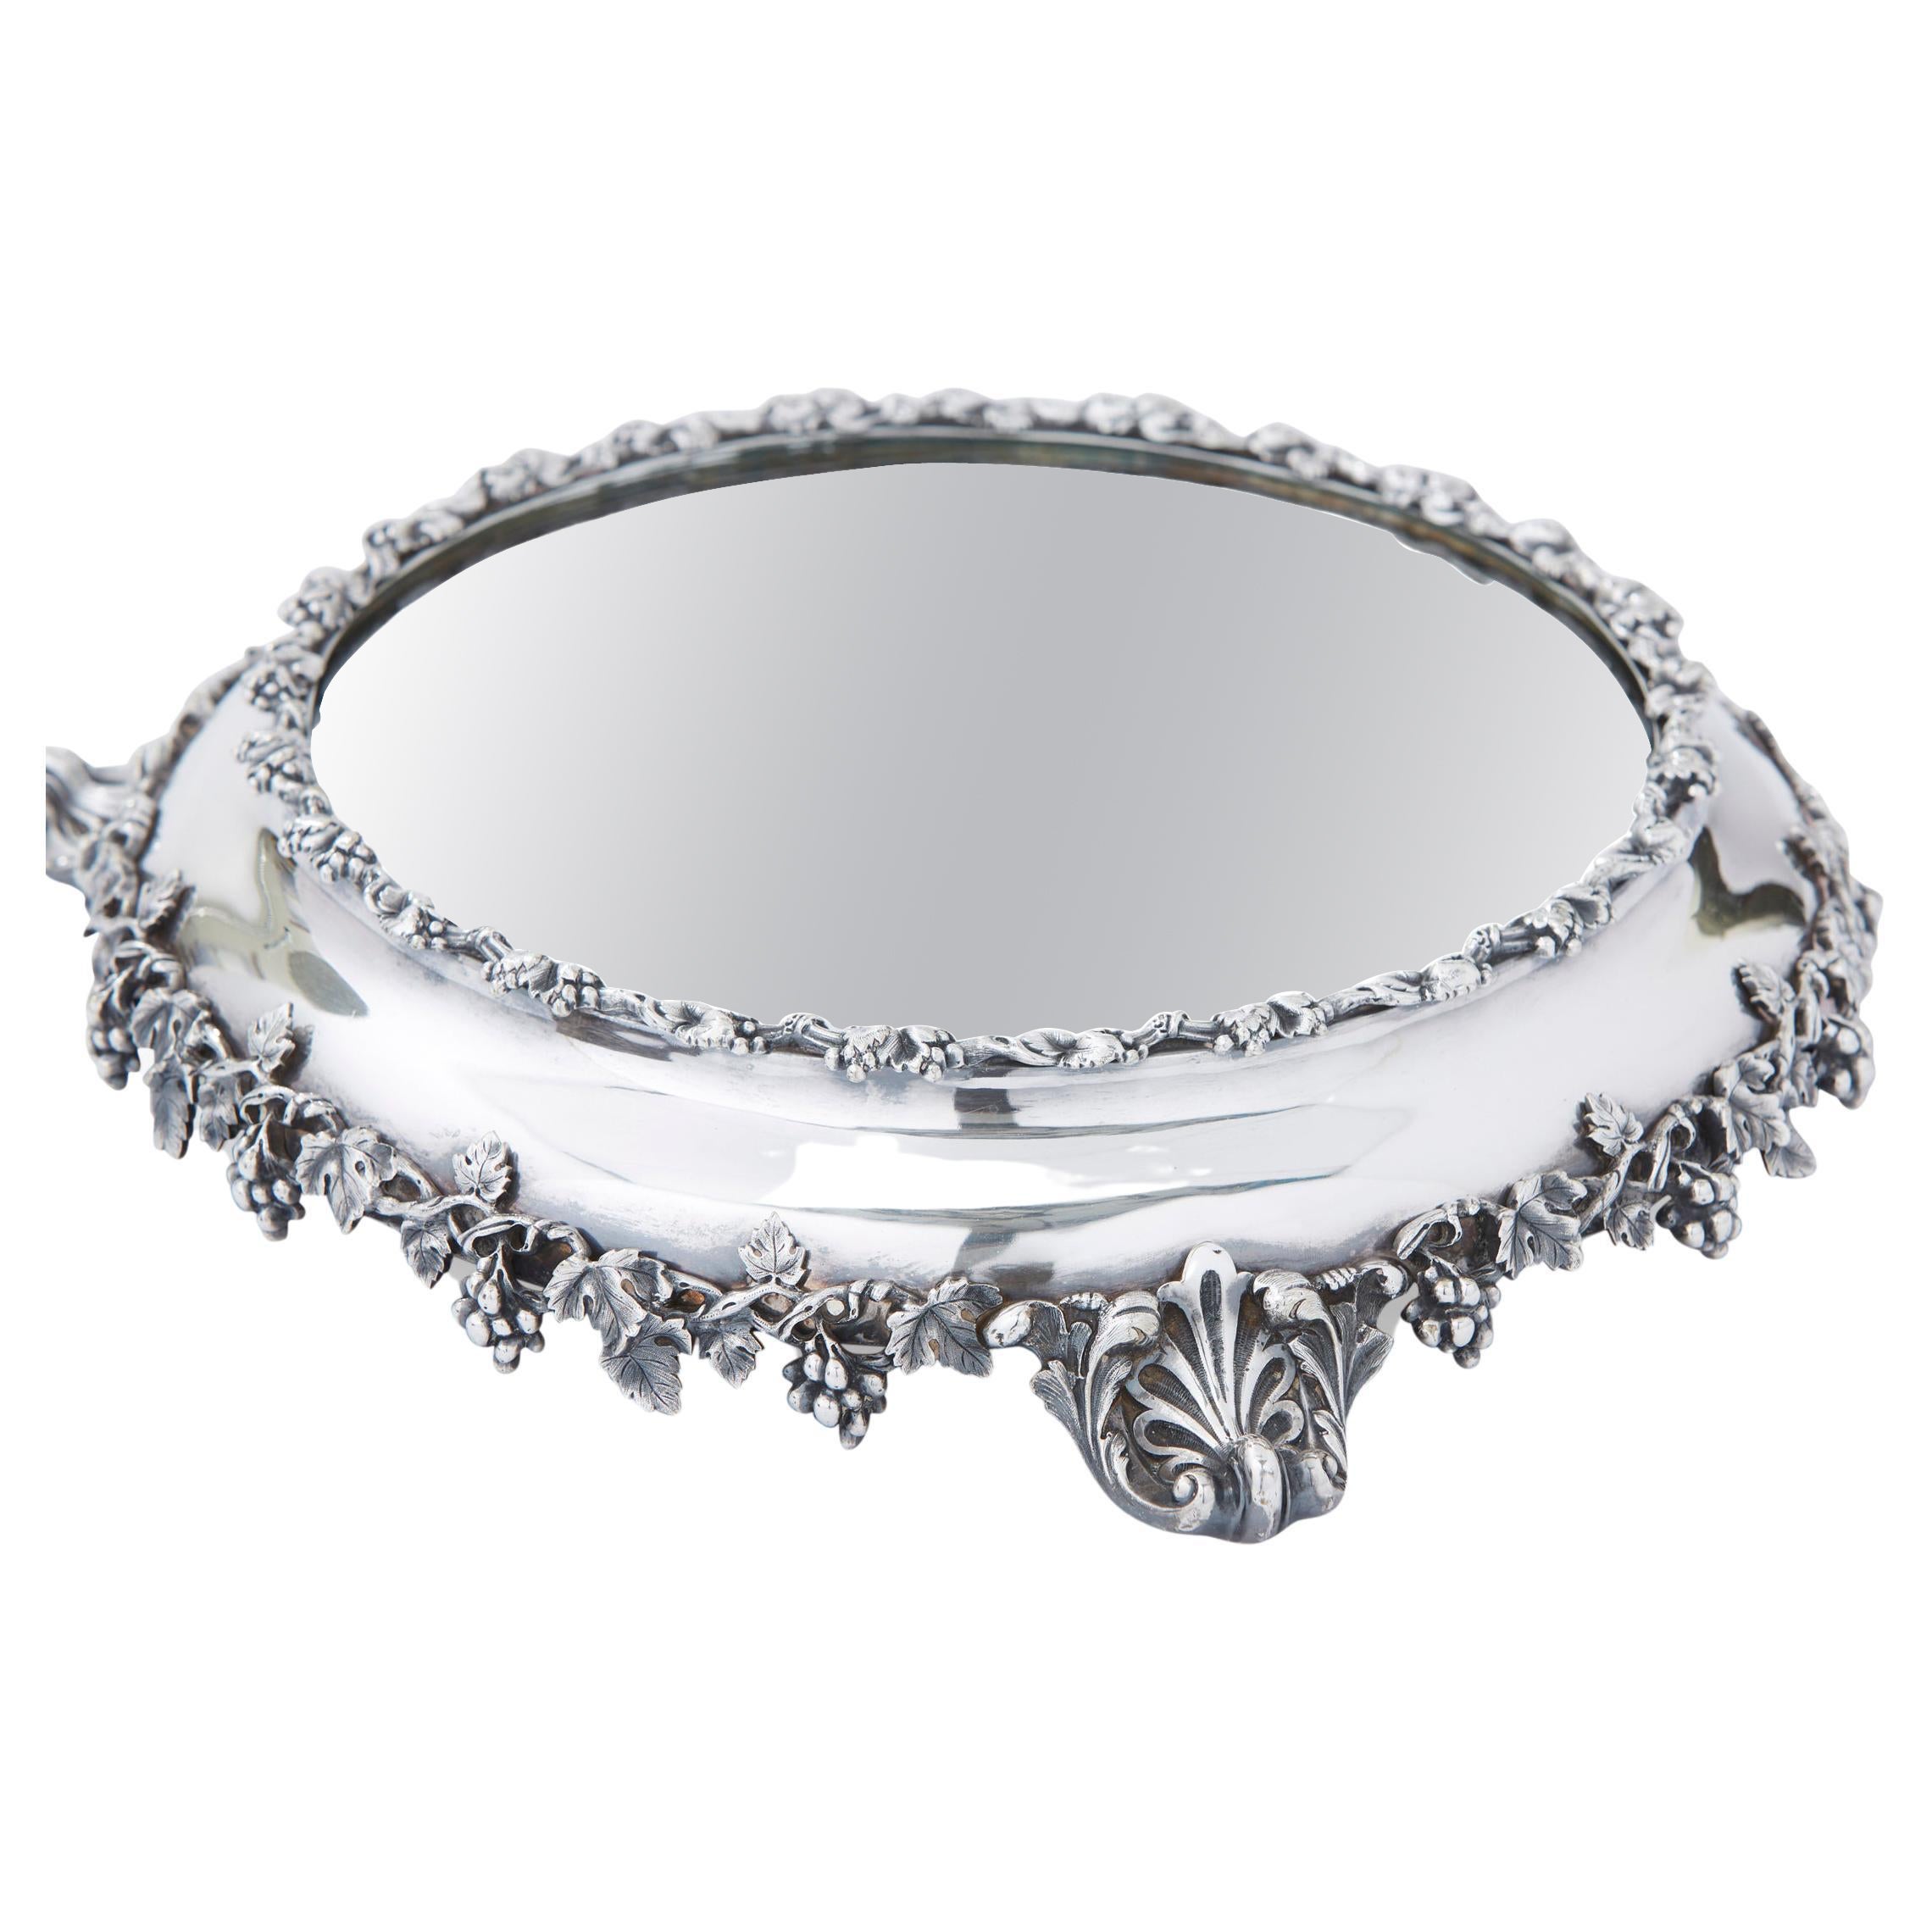 Mirrored Vanity Tray For At 1stdibs, Mirror Vanity Tray Silver